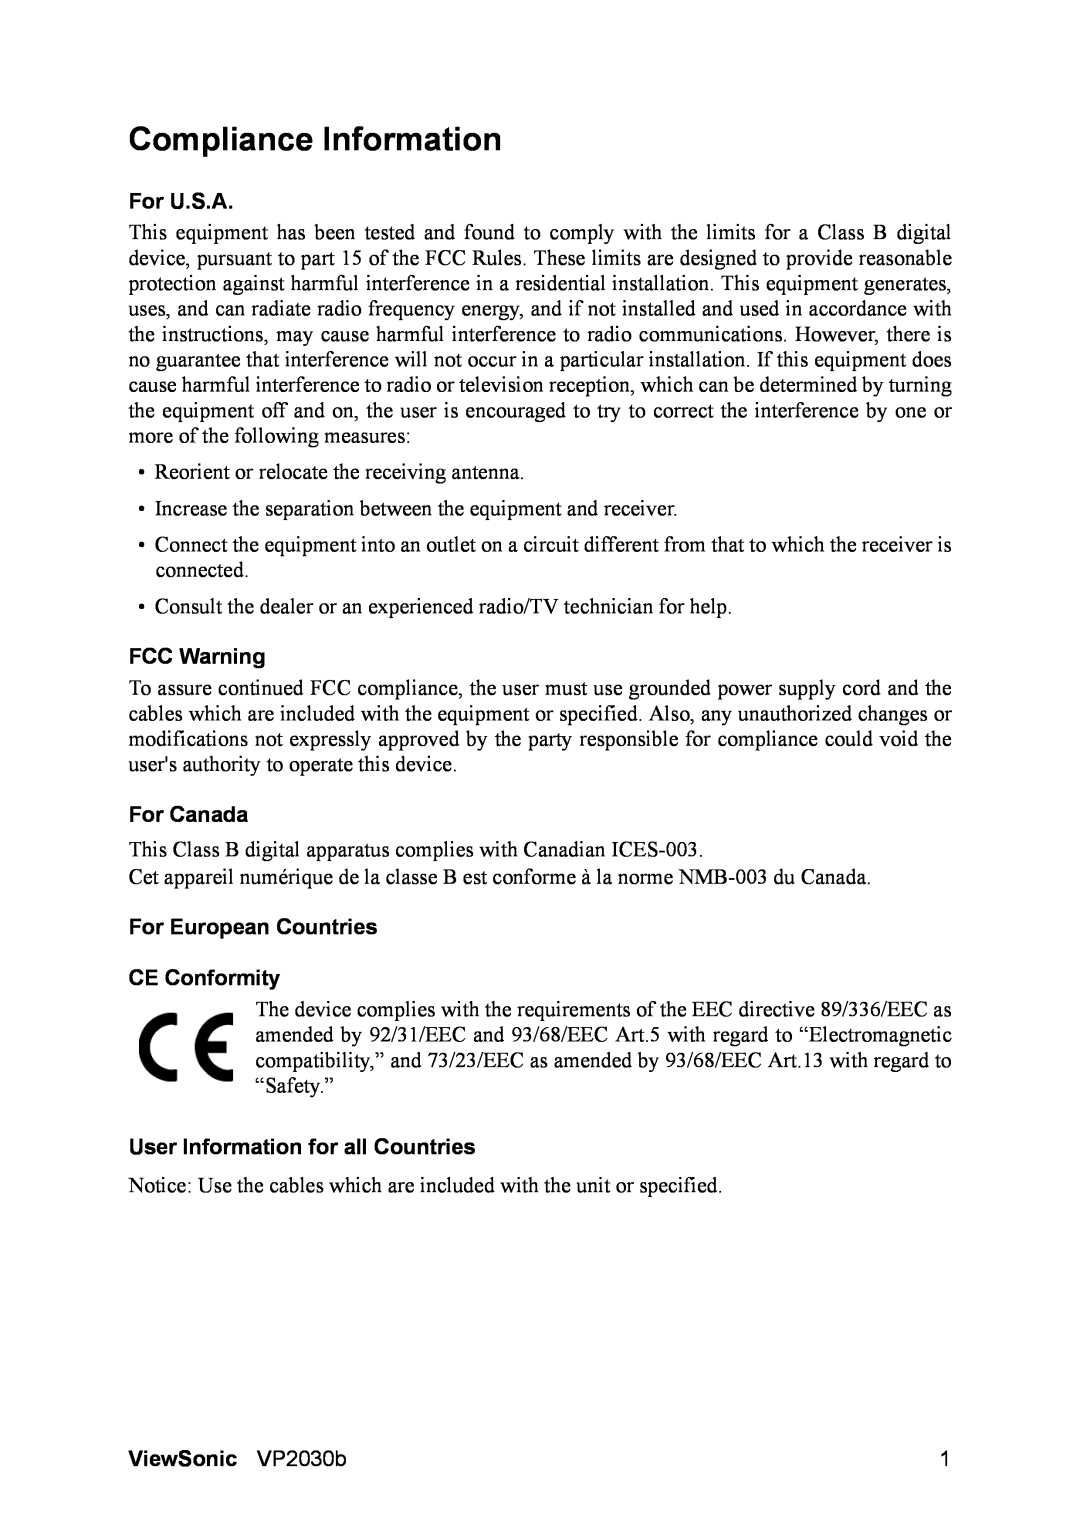 ViewSonic VP2030B manual Compliance Information, For U.S.A, FCC Warning, For Canada, For European Countries CE Conformity 